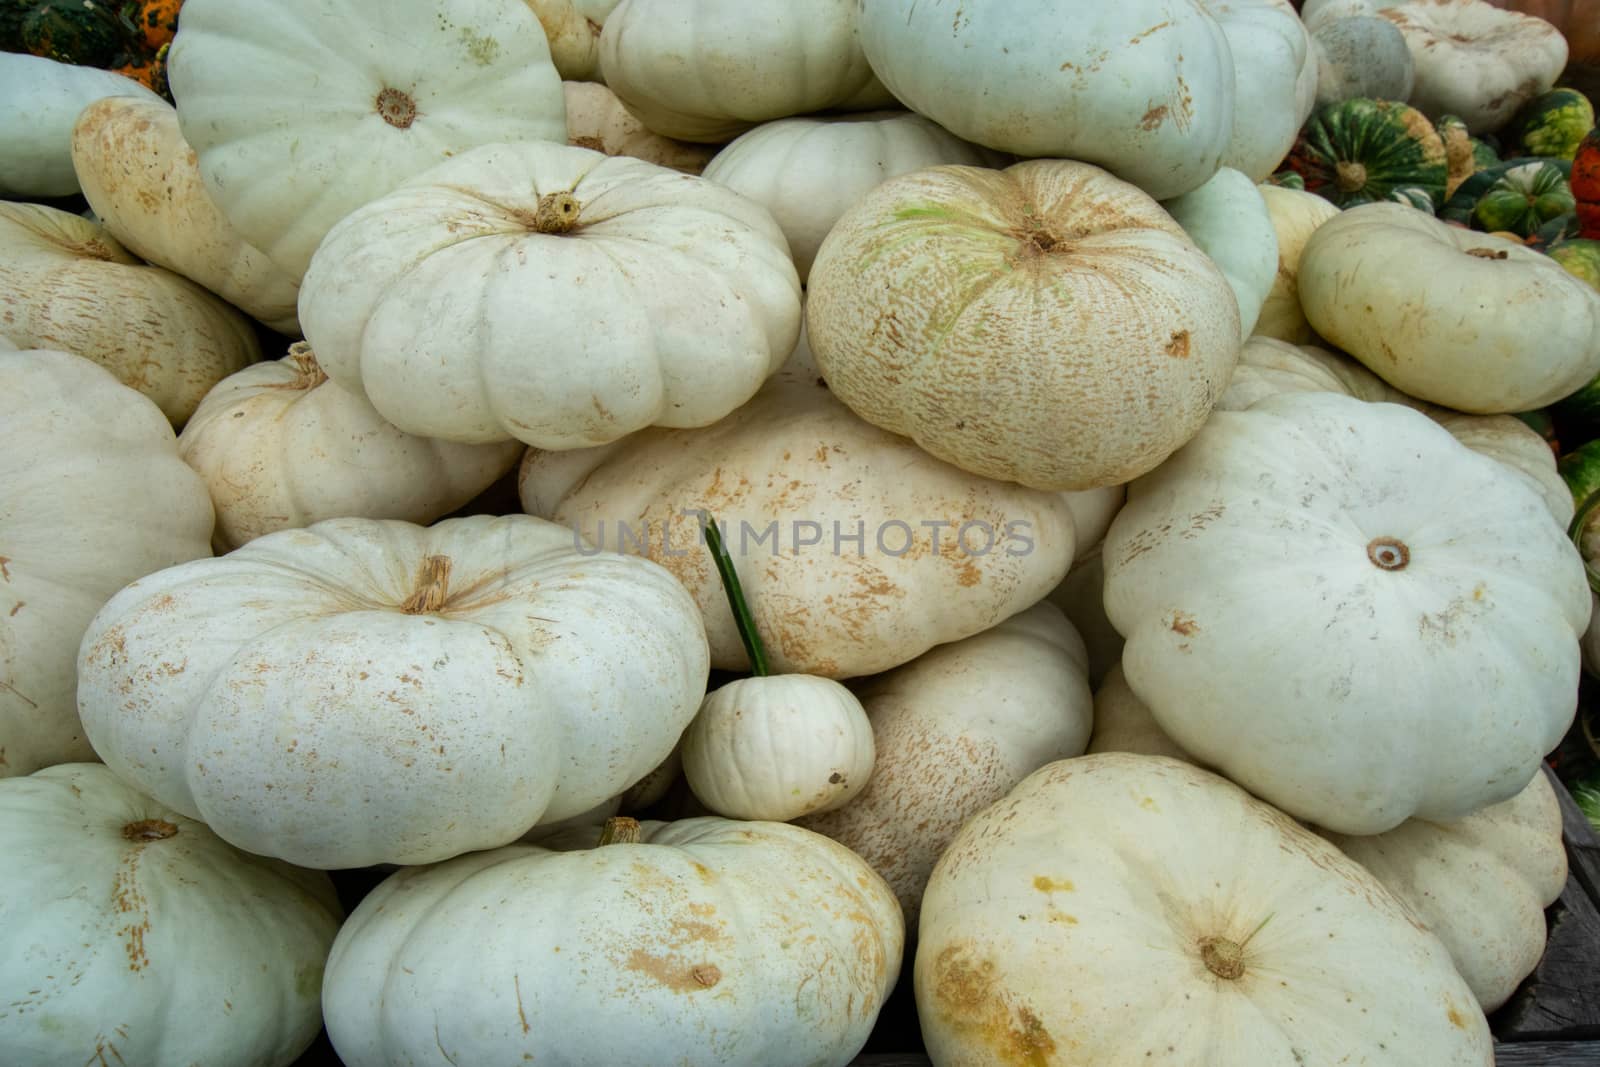 A Pile of Large White Pumpkins in a Wooden Box at a Farmer's Market Filling the Frame